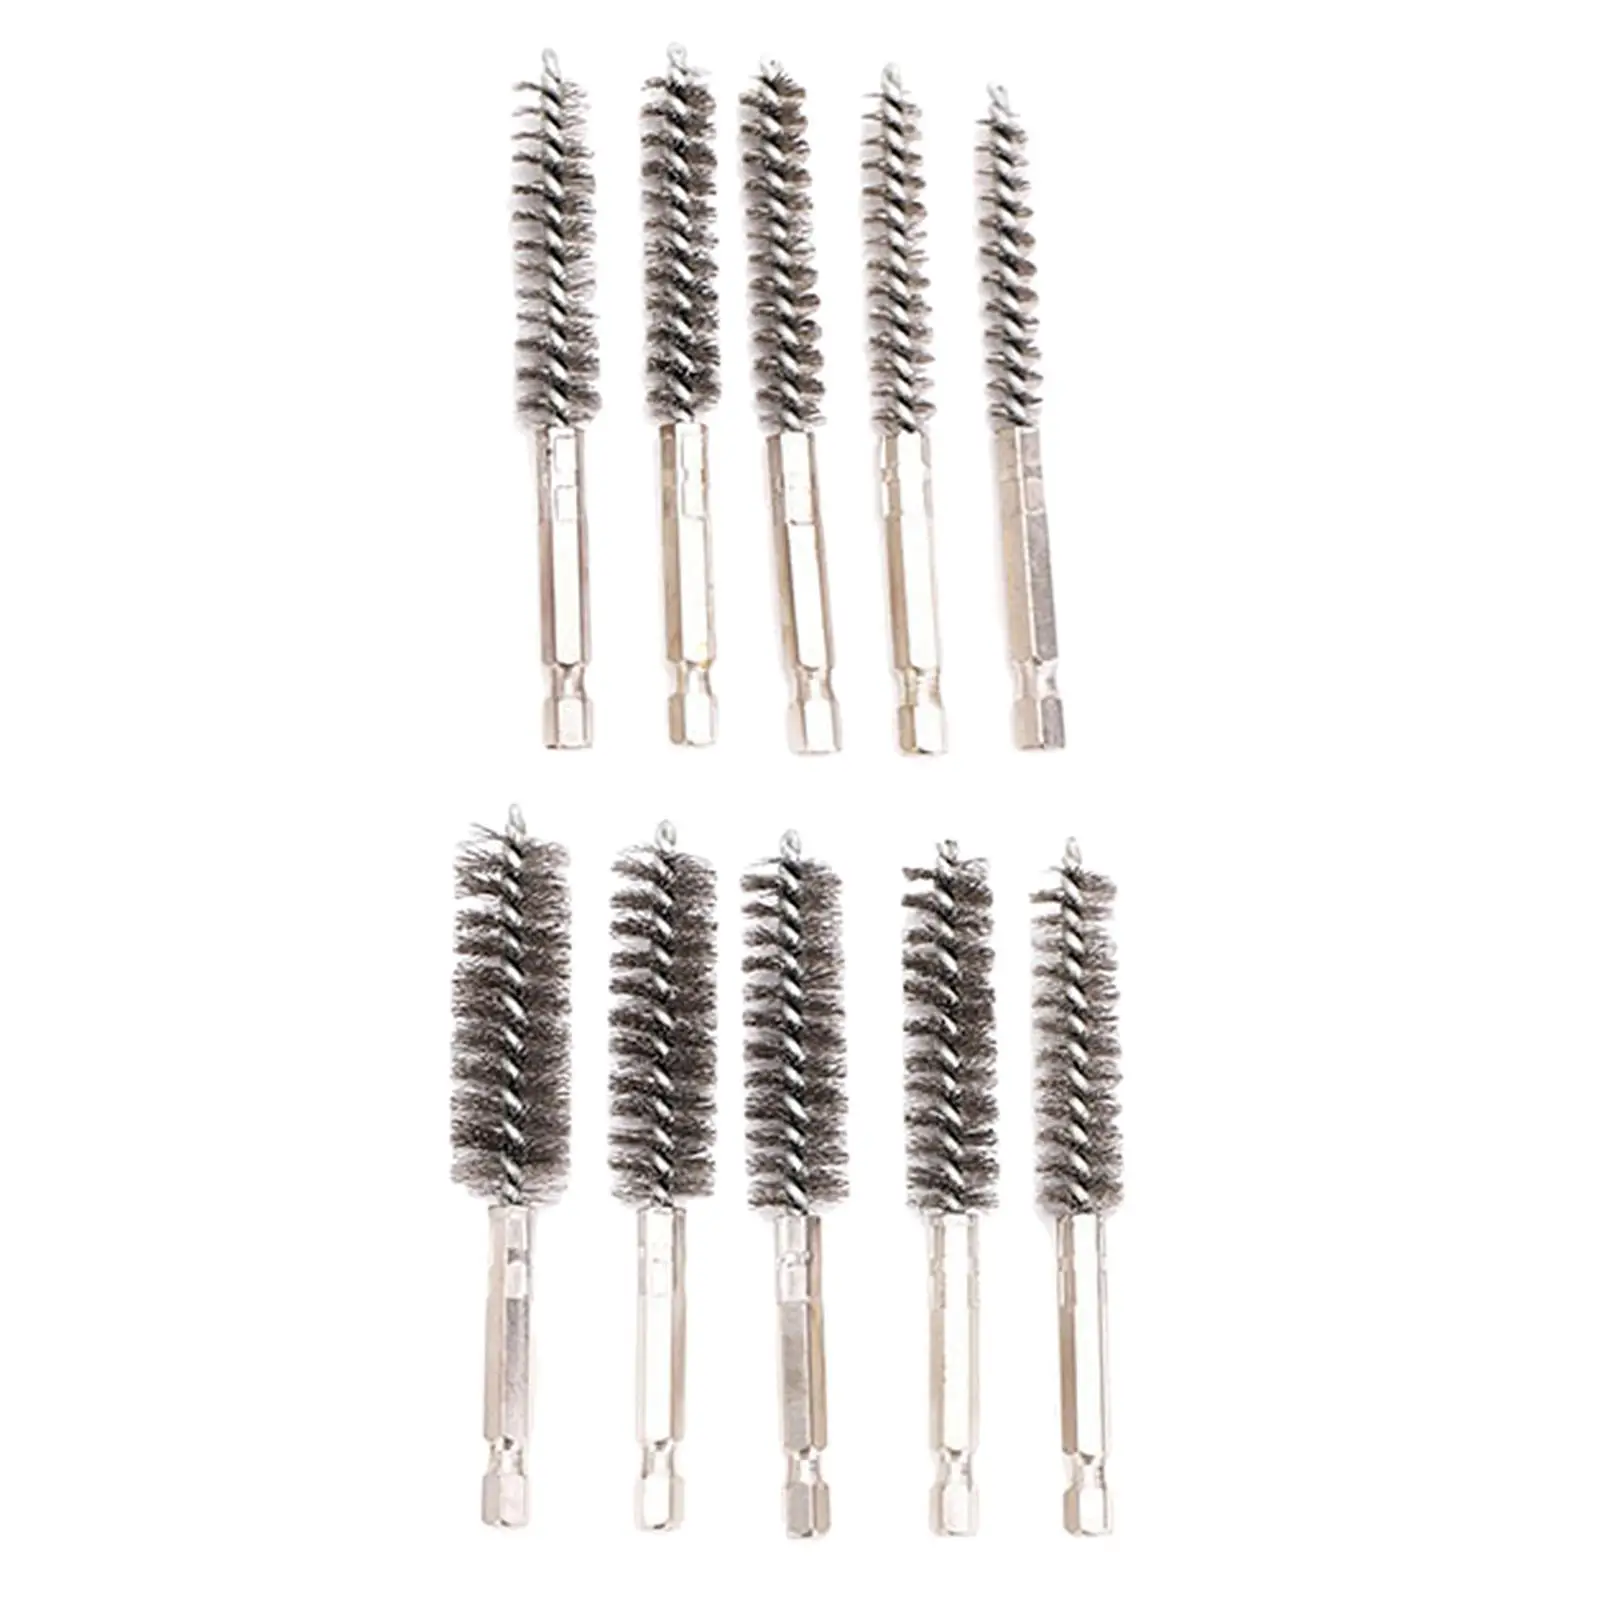 10x Tube Brush Paint Remover Hex Shank Handle Flexible Pipe Brush for Ports Cylinders Fabrication Bearings Electric Drill Impact